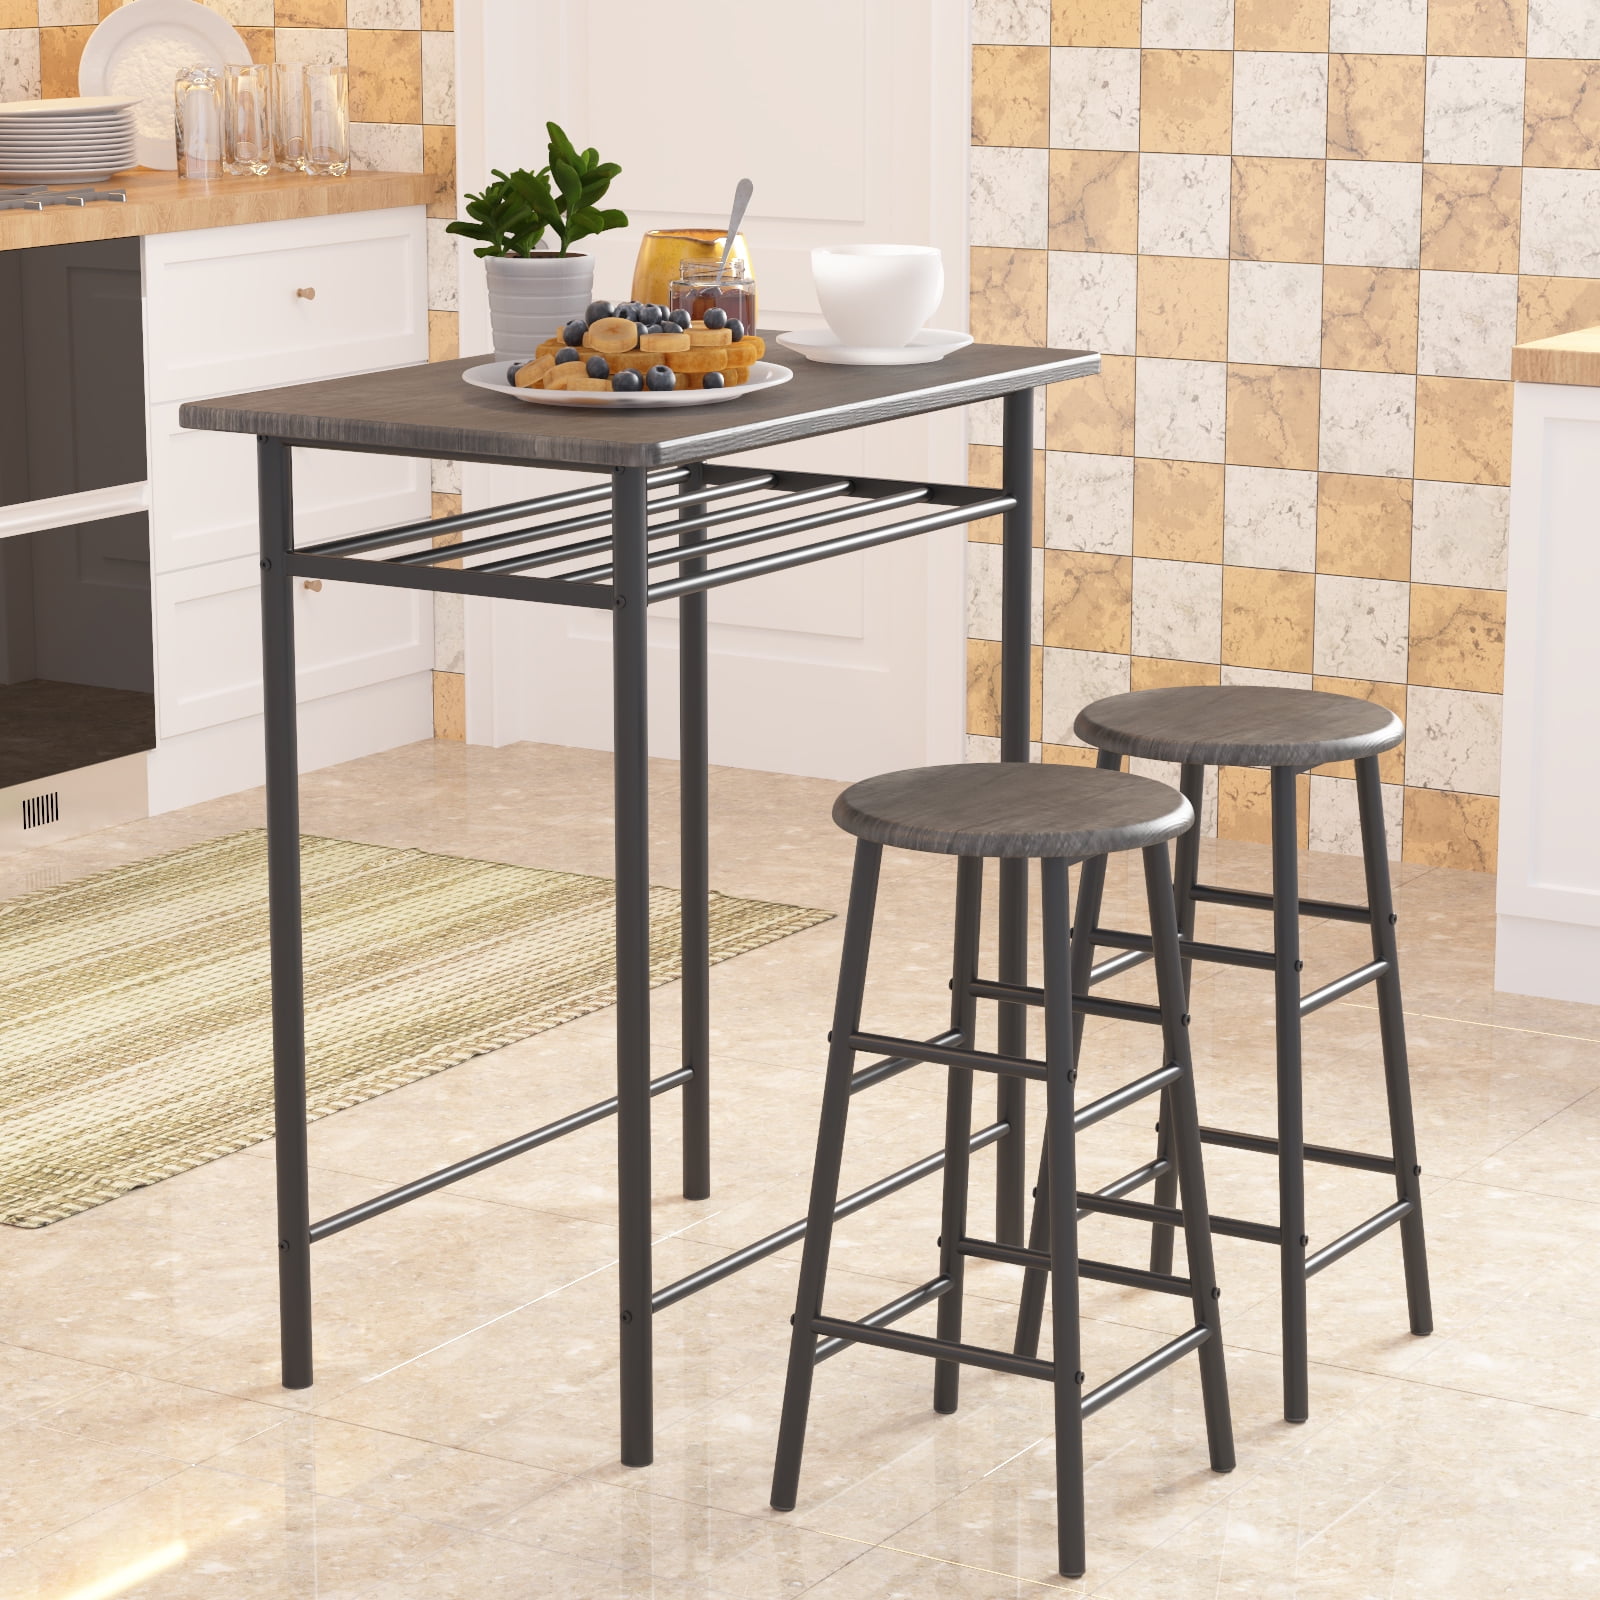 Elephance 3 Piece Bar Table Set Pub Table Counter Height Dining Set Table And 2 Stools With